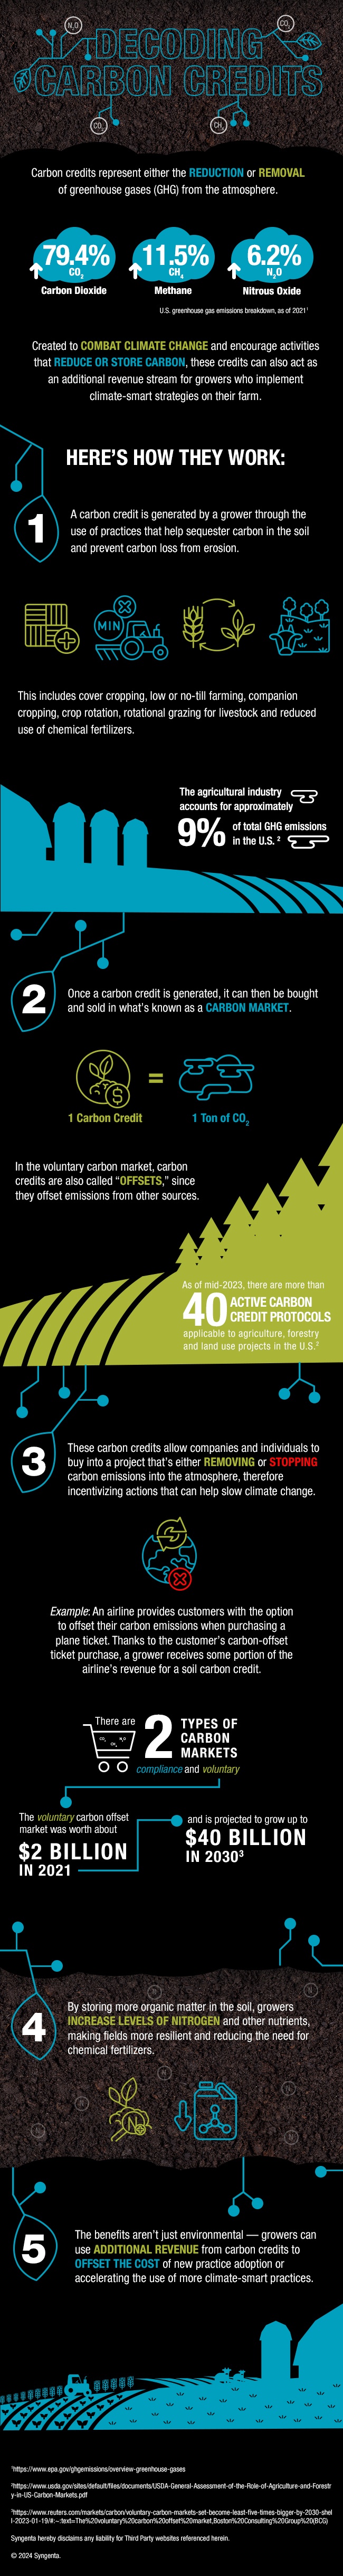 An infographic with illustrations, data, and facts about decoding carbon credits for farmers